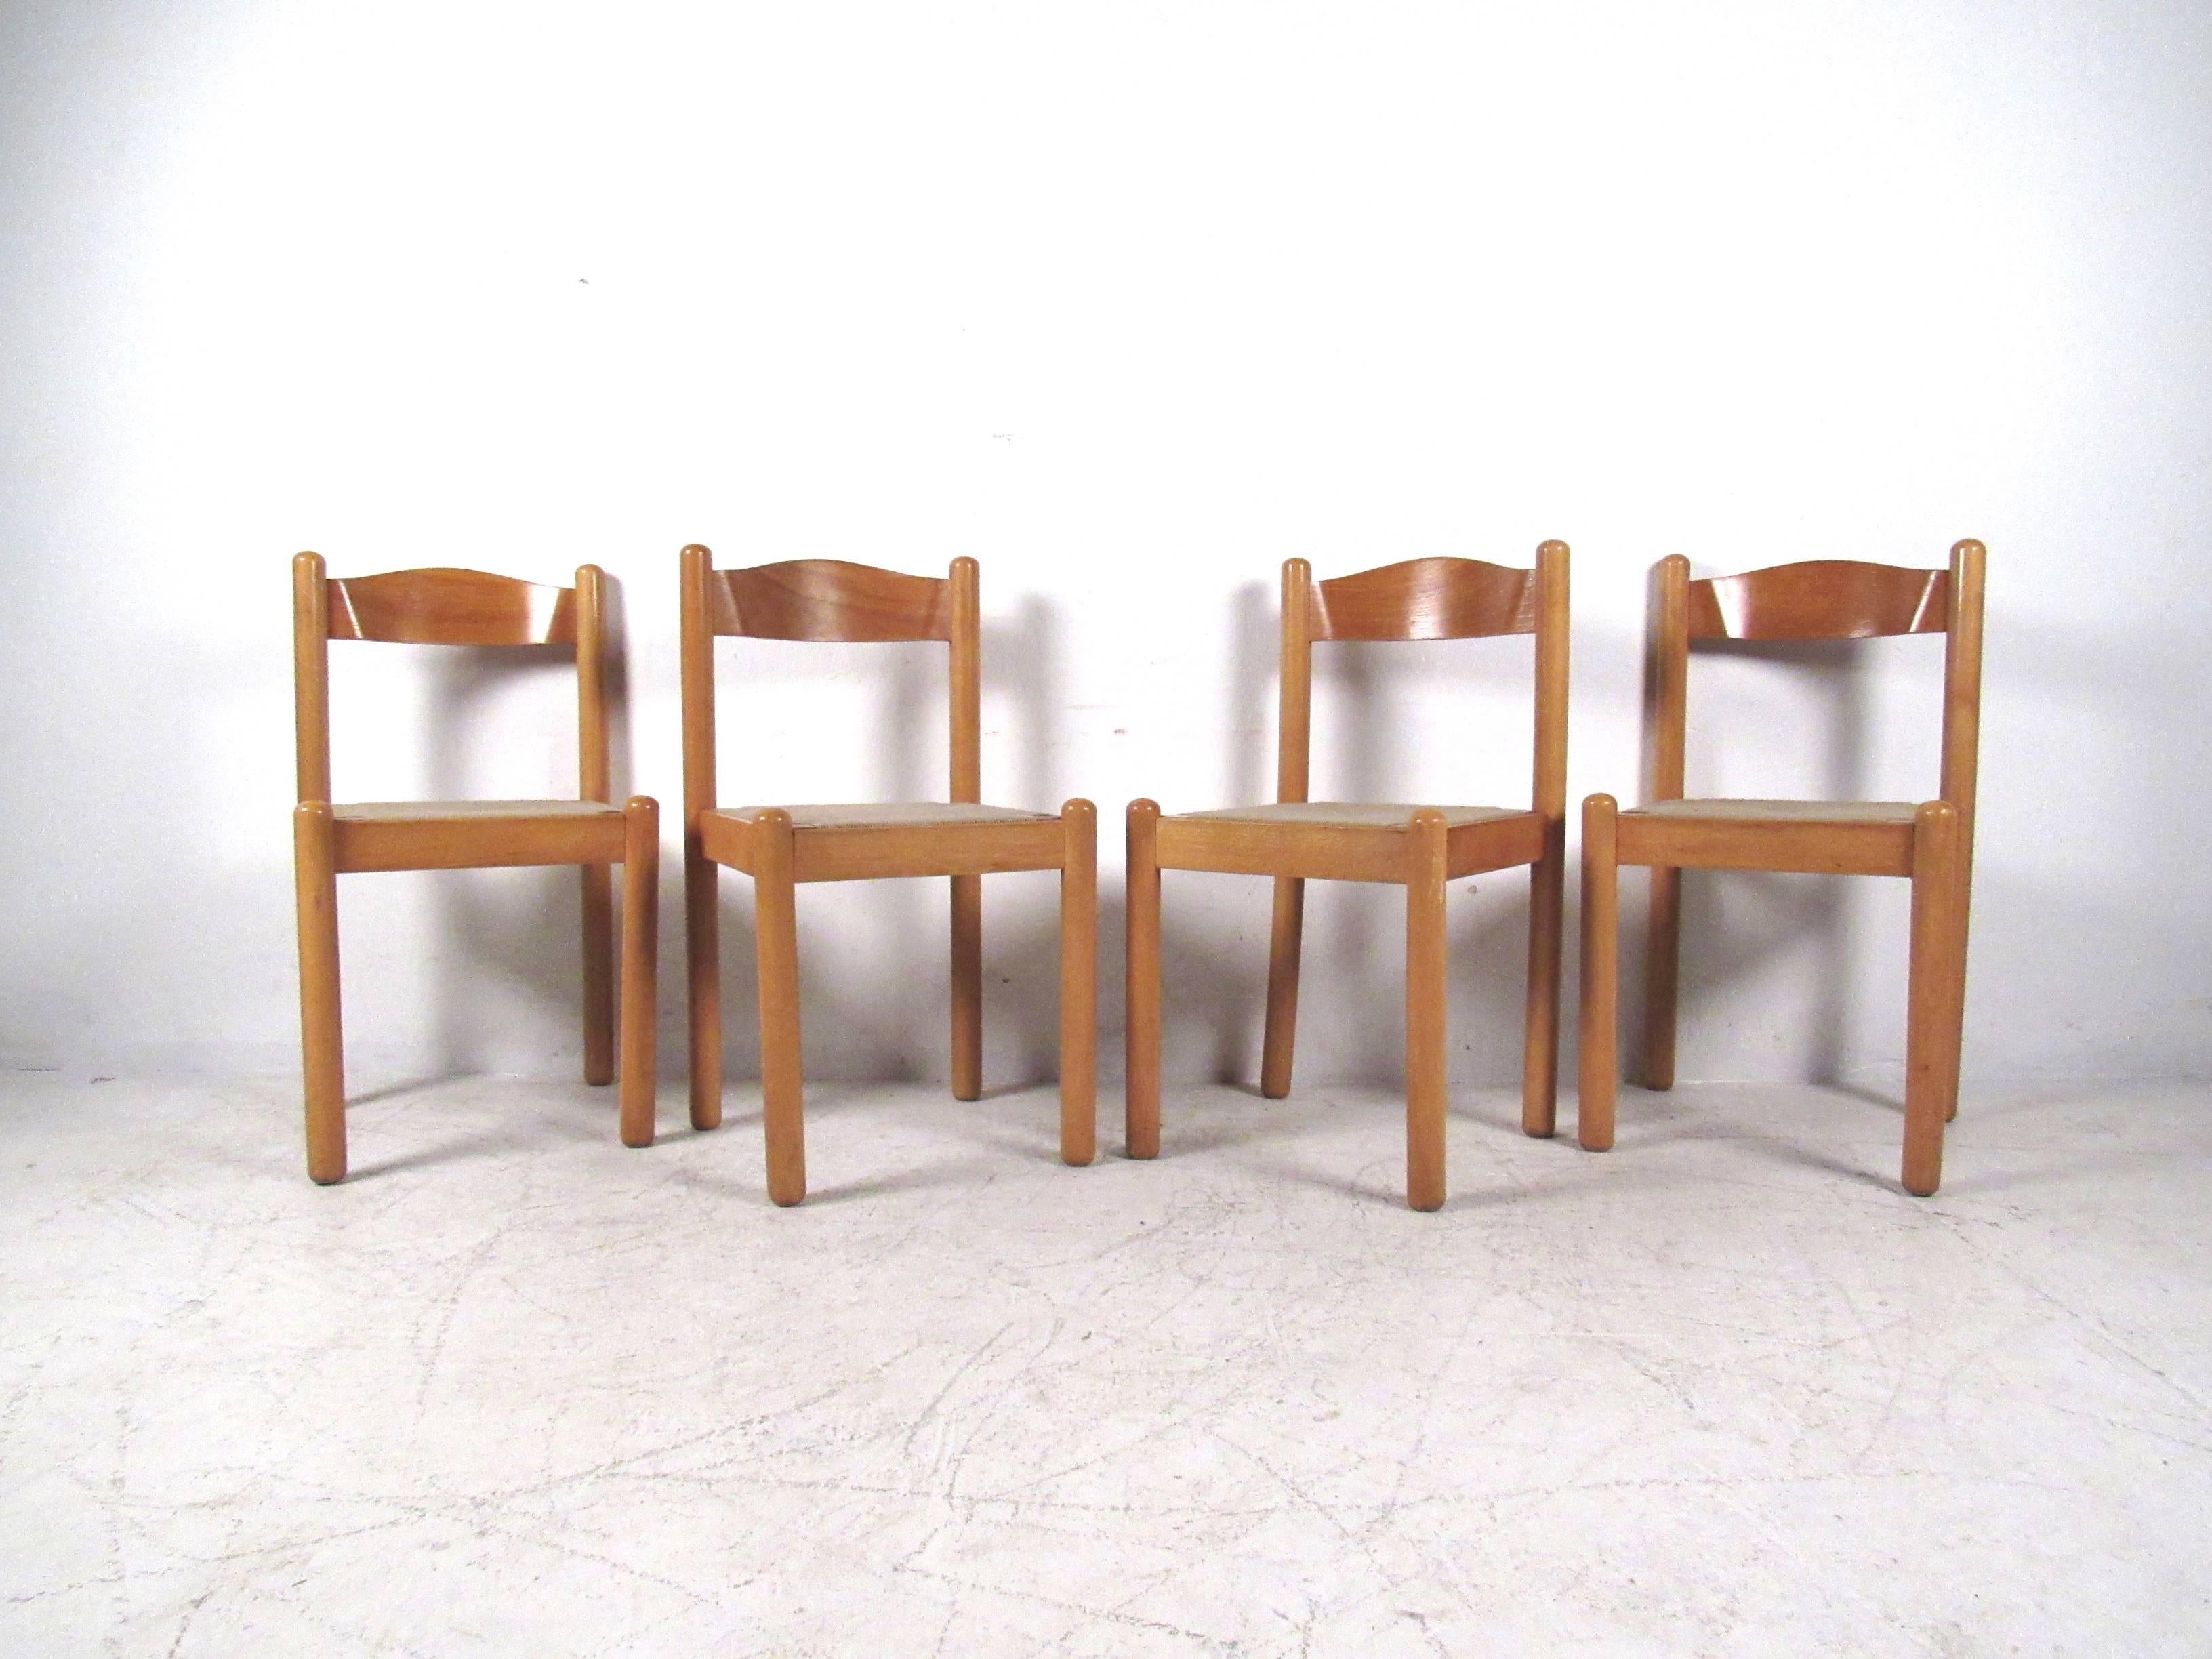 Beautiful set of four Italian modern dining chairs features rush seats and curved backs. Unique chairs for any setting, please confirm item location (NY or NJ).